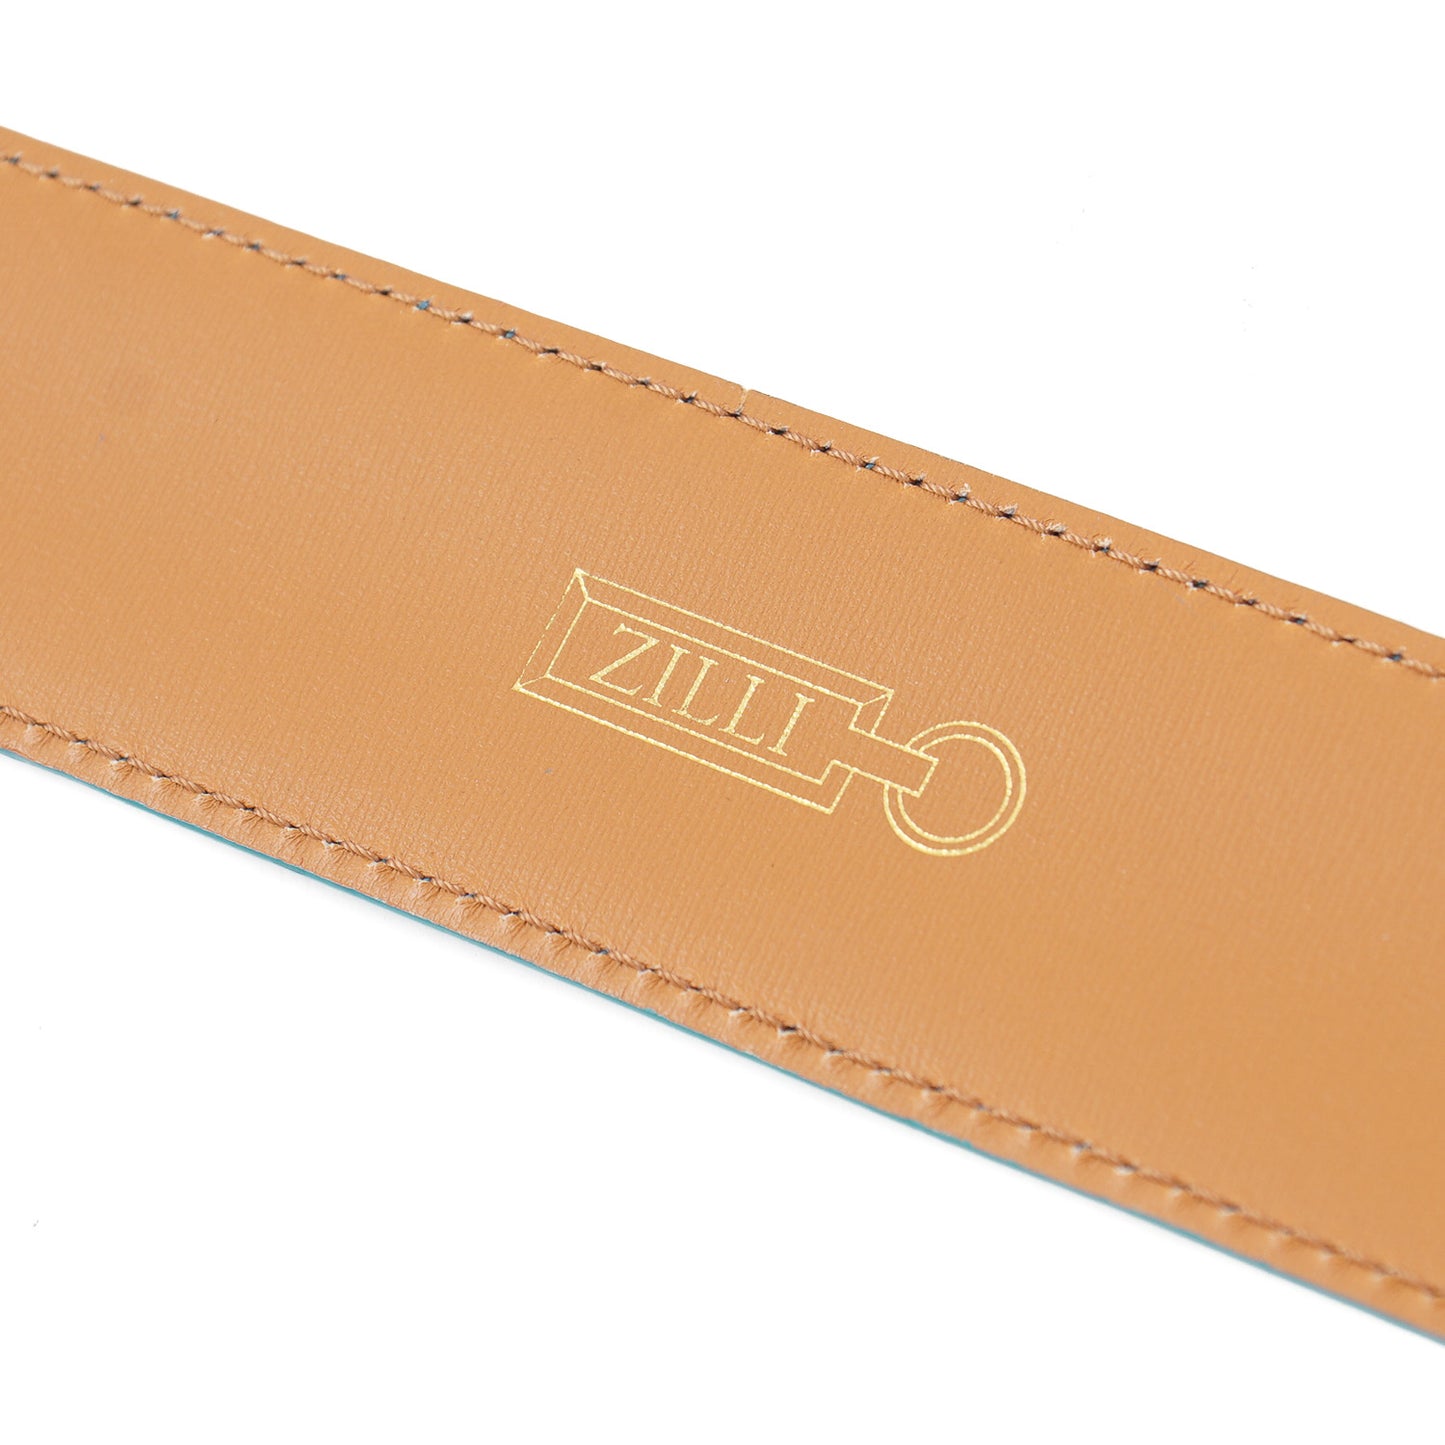 Zilli Belt in Leather and Snake Skin - Top Shelf Apparel